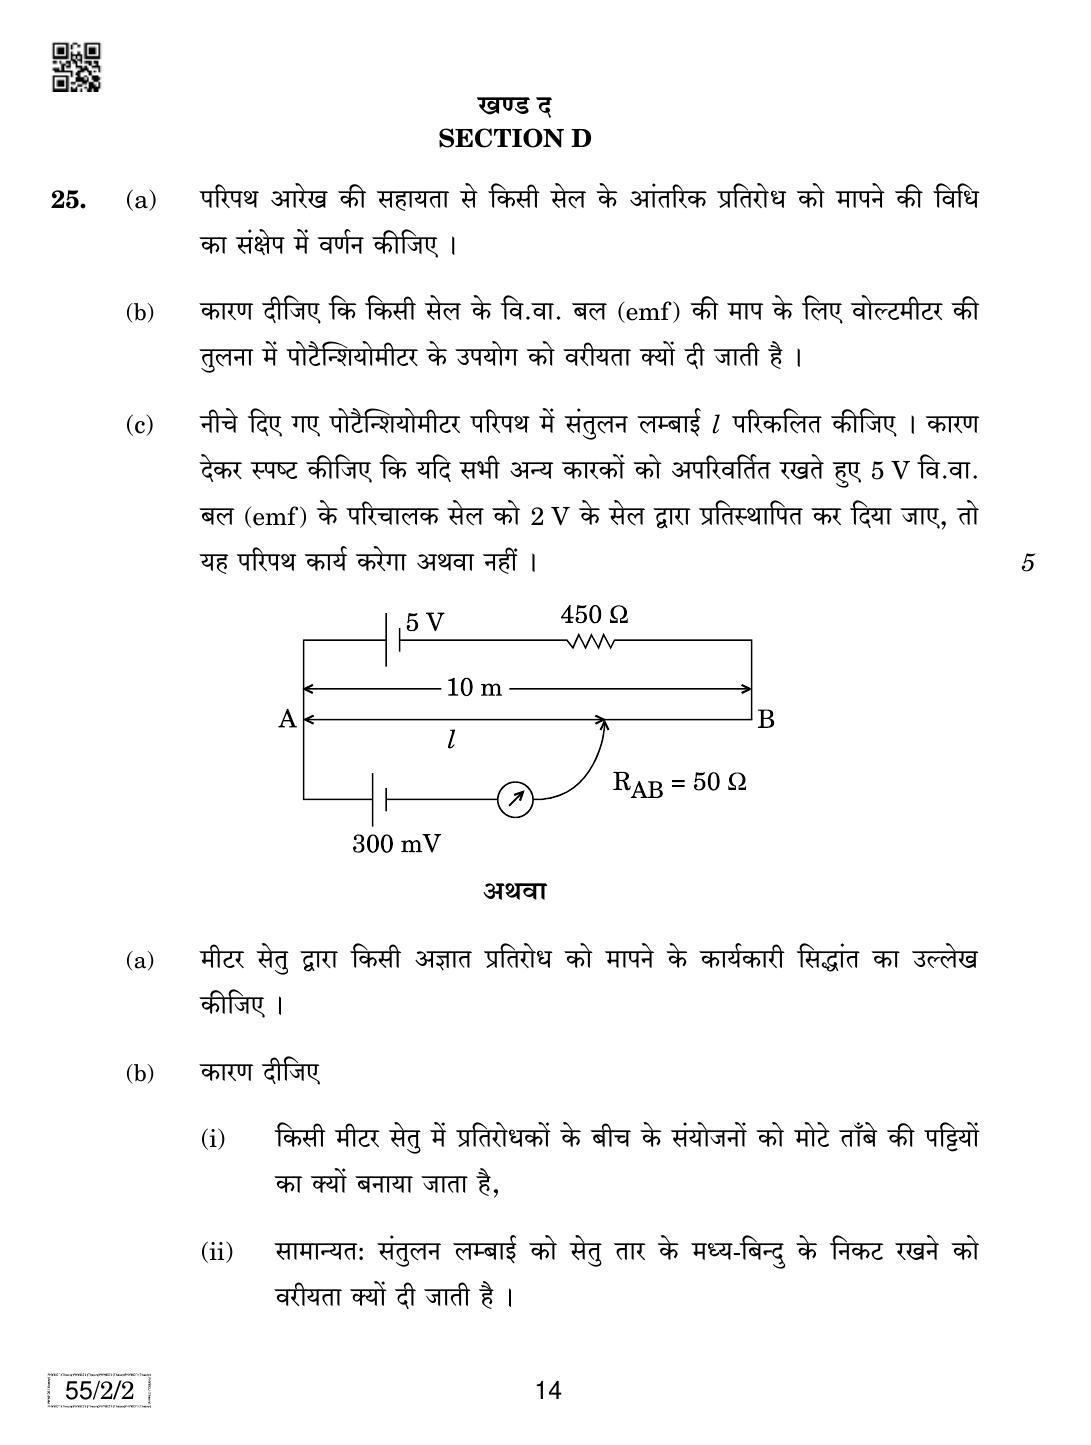 CBSE Class 12 55-2-2 Physics 2019 Question Paper - Page 14